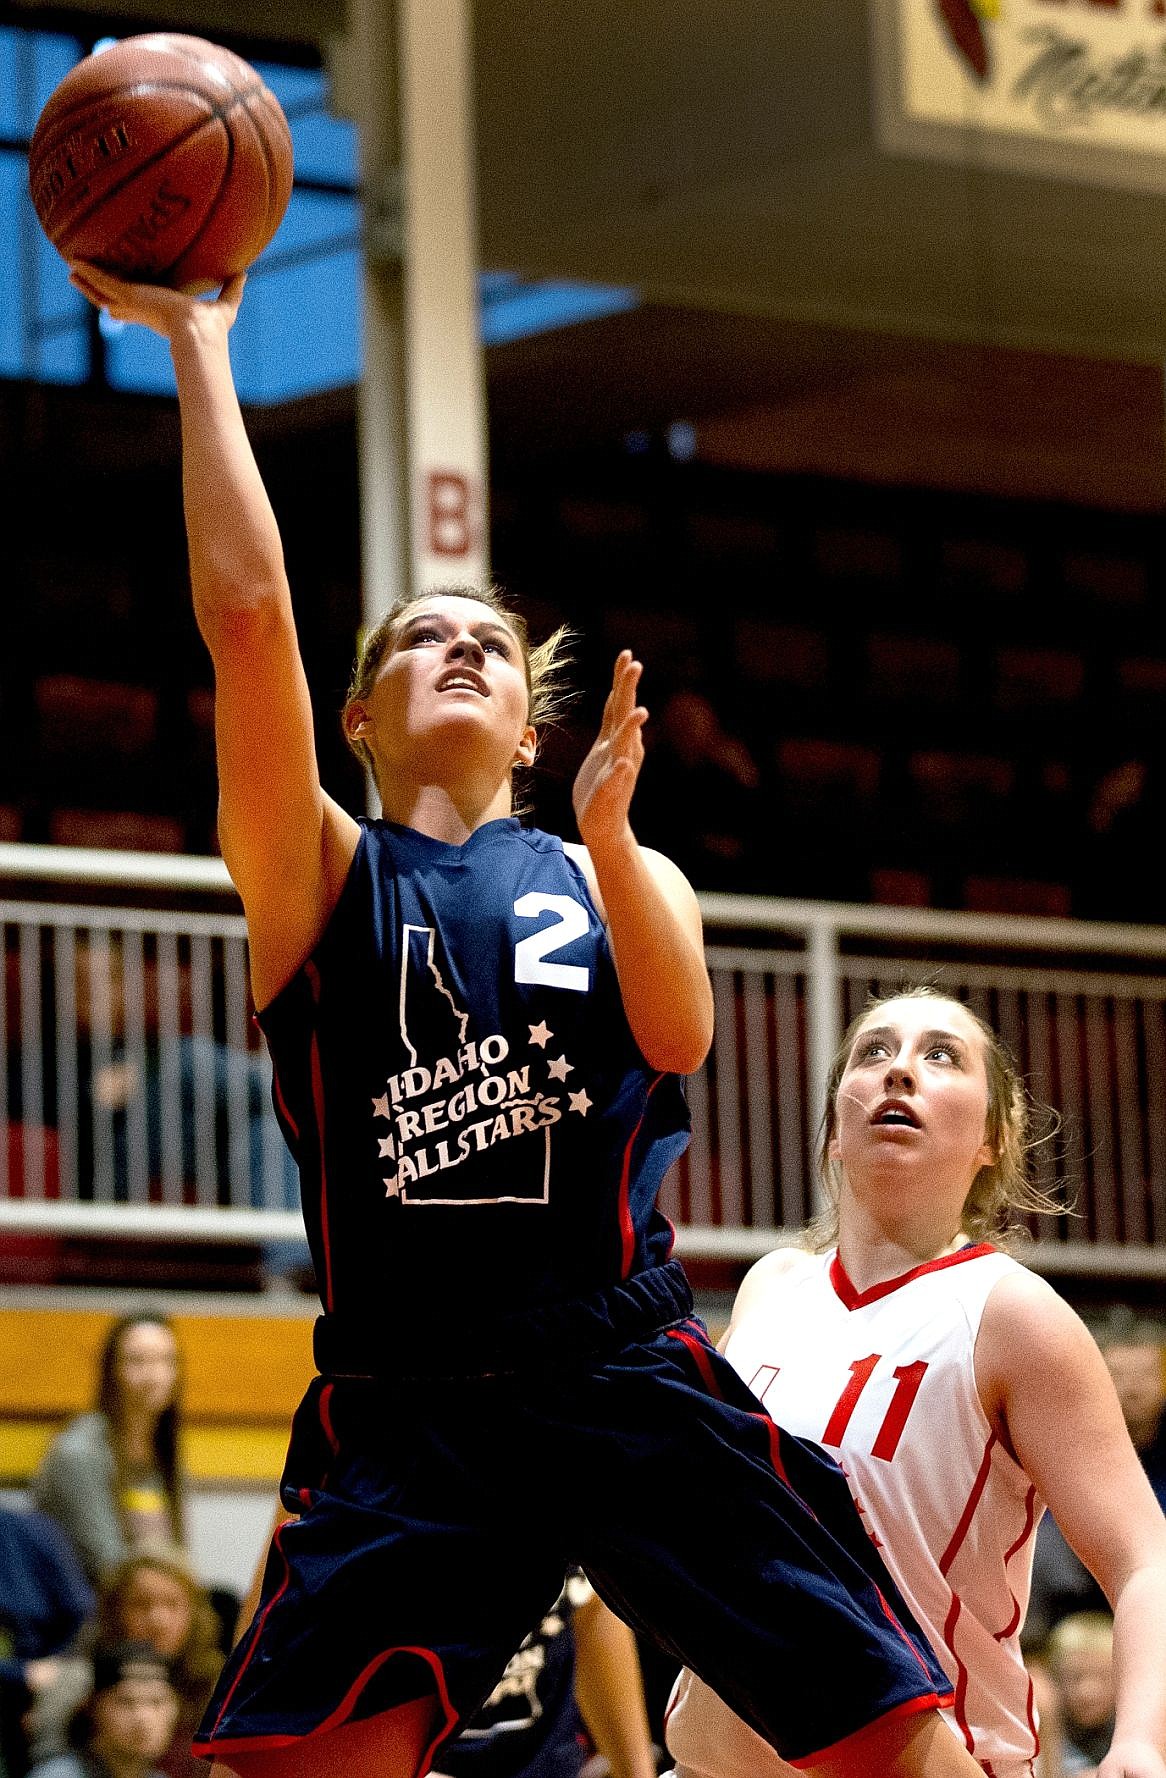 &lt;p&gt;JAKE PARRISH/Press Region's Cierra Dvork, of Lake City High School, goes in for a lay-up as Metro's Zoe Wessels watches at the 13 Annual Idaho High School All Star Game on Saturday at North Idaho College.&lt;/p&gt;